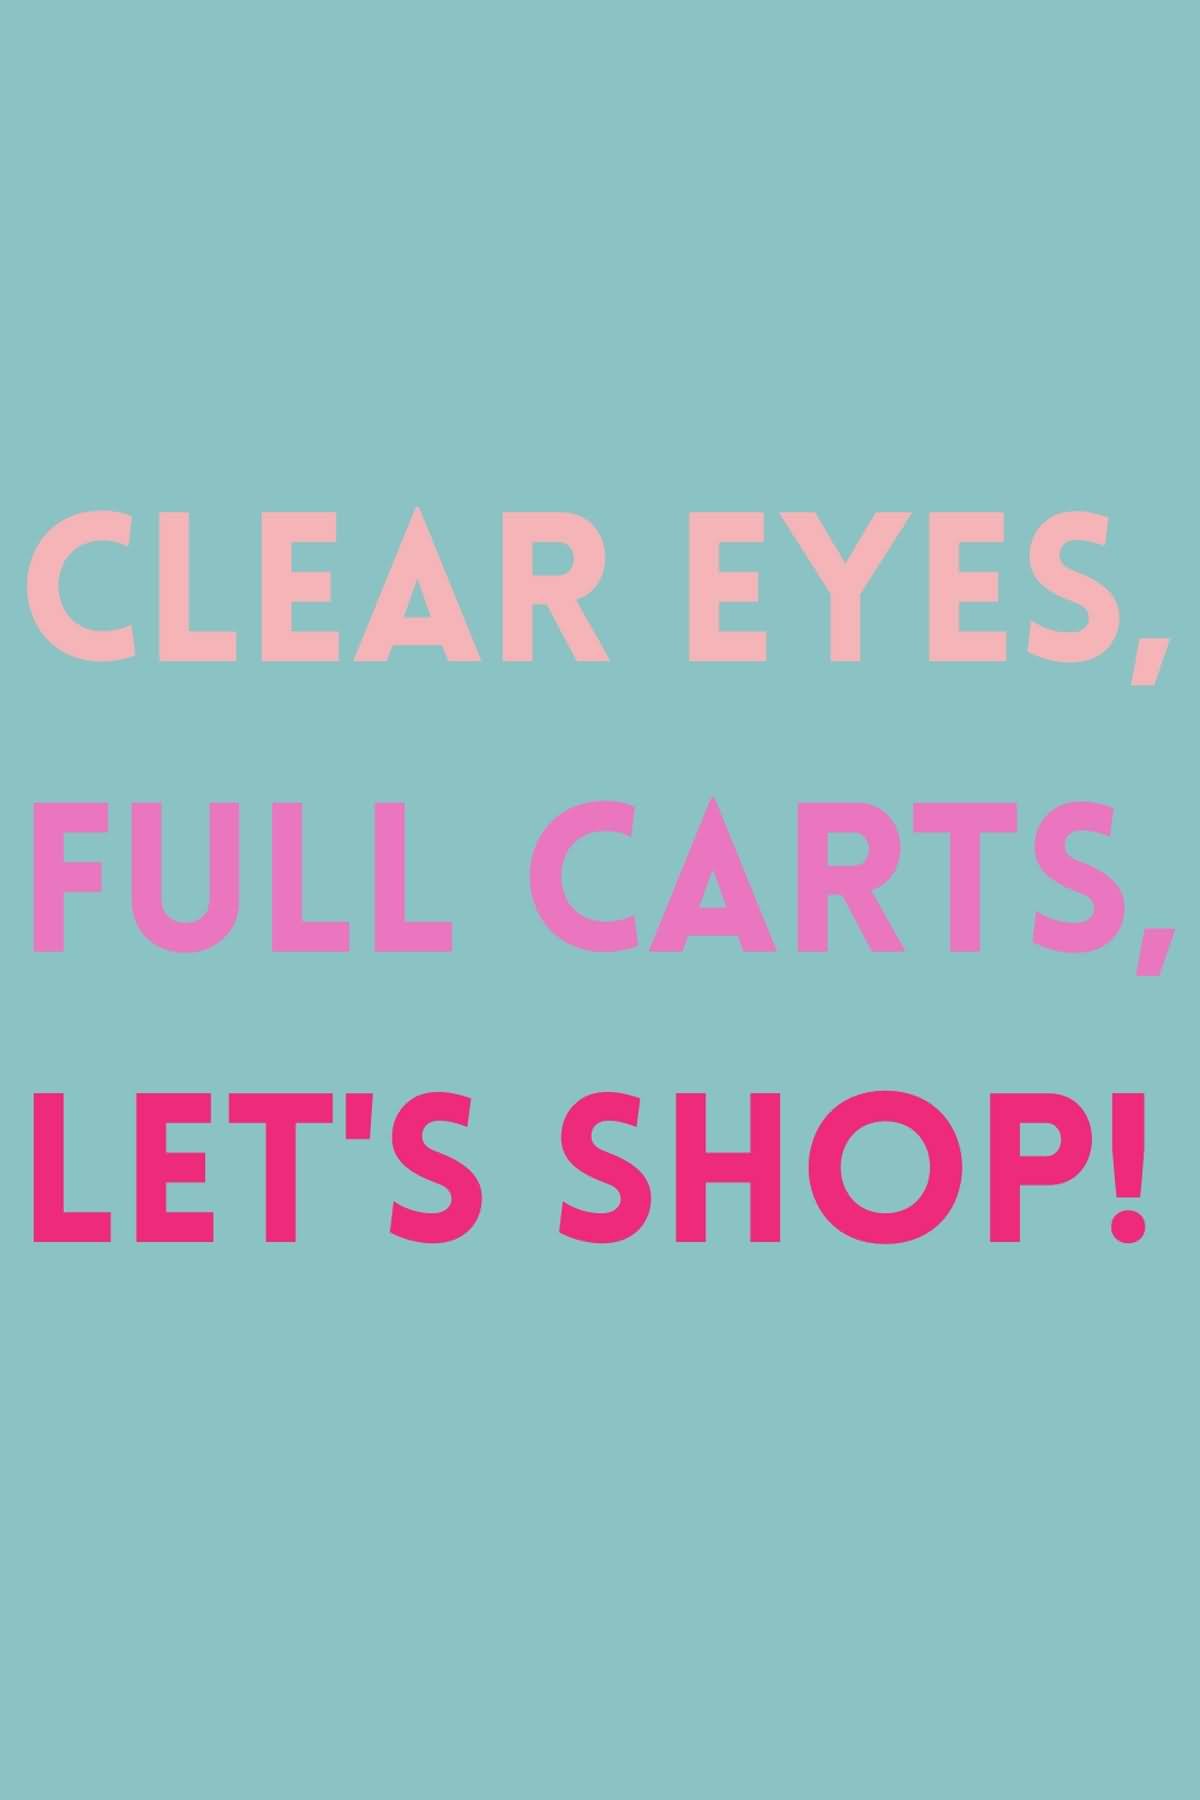 Clear Eyes Full Carts Black Friday Greeting Images